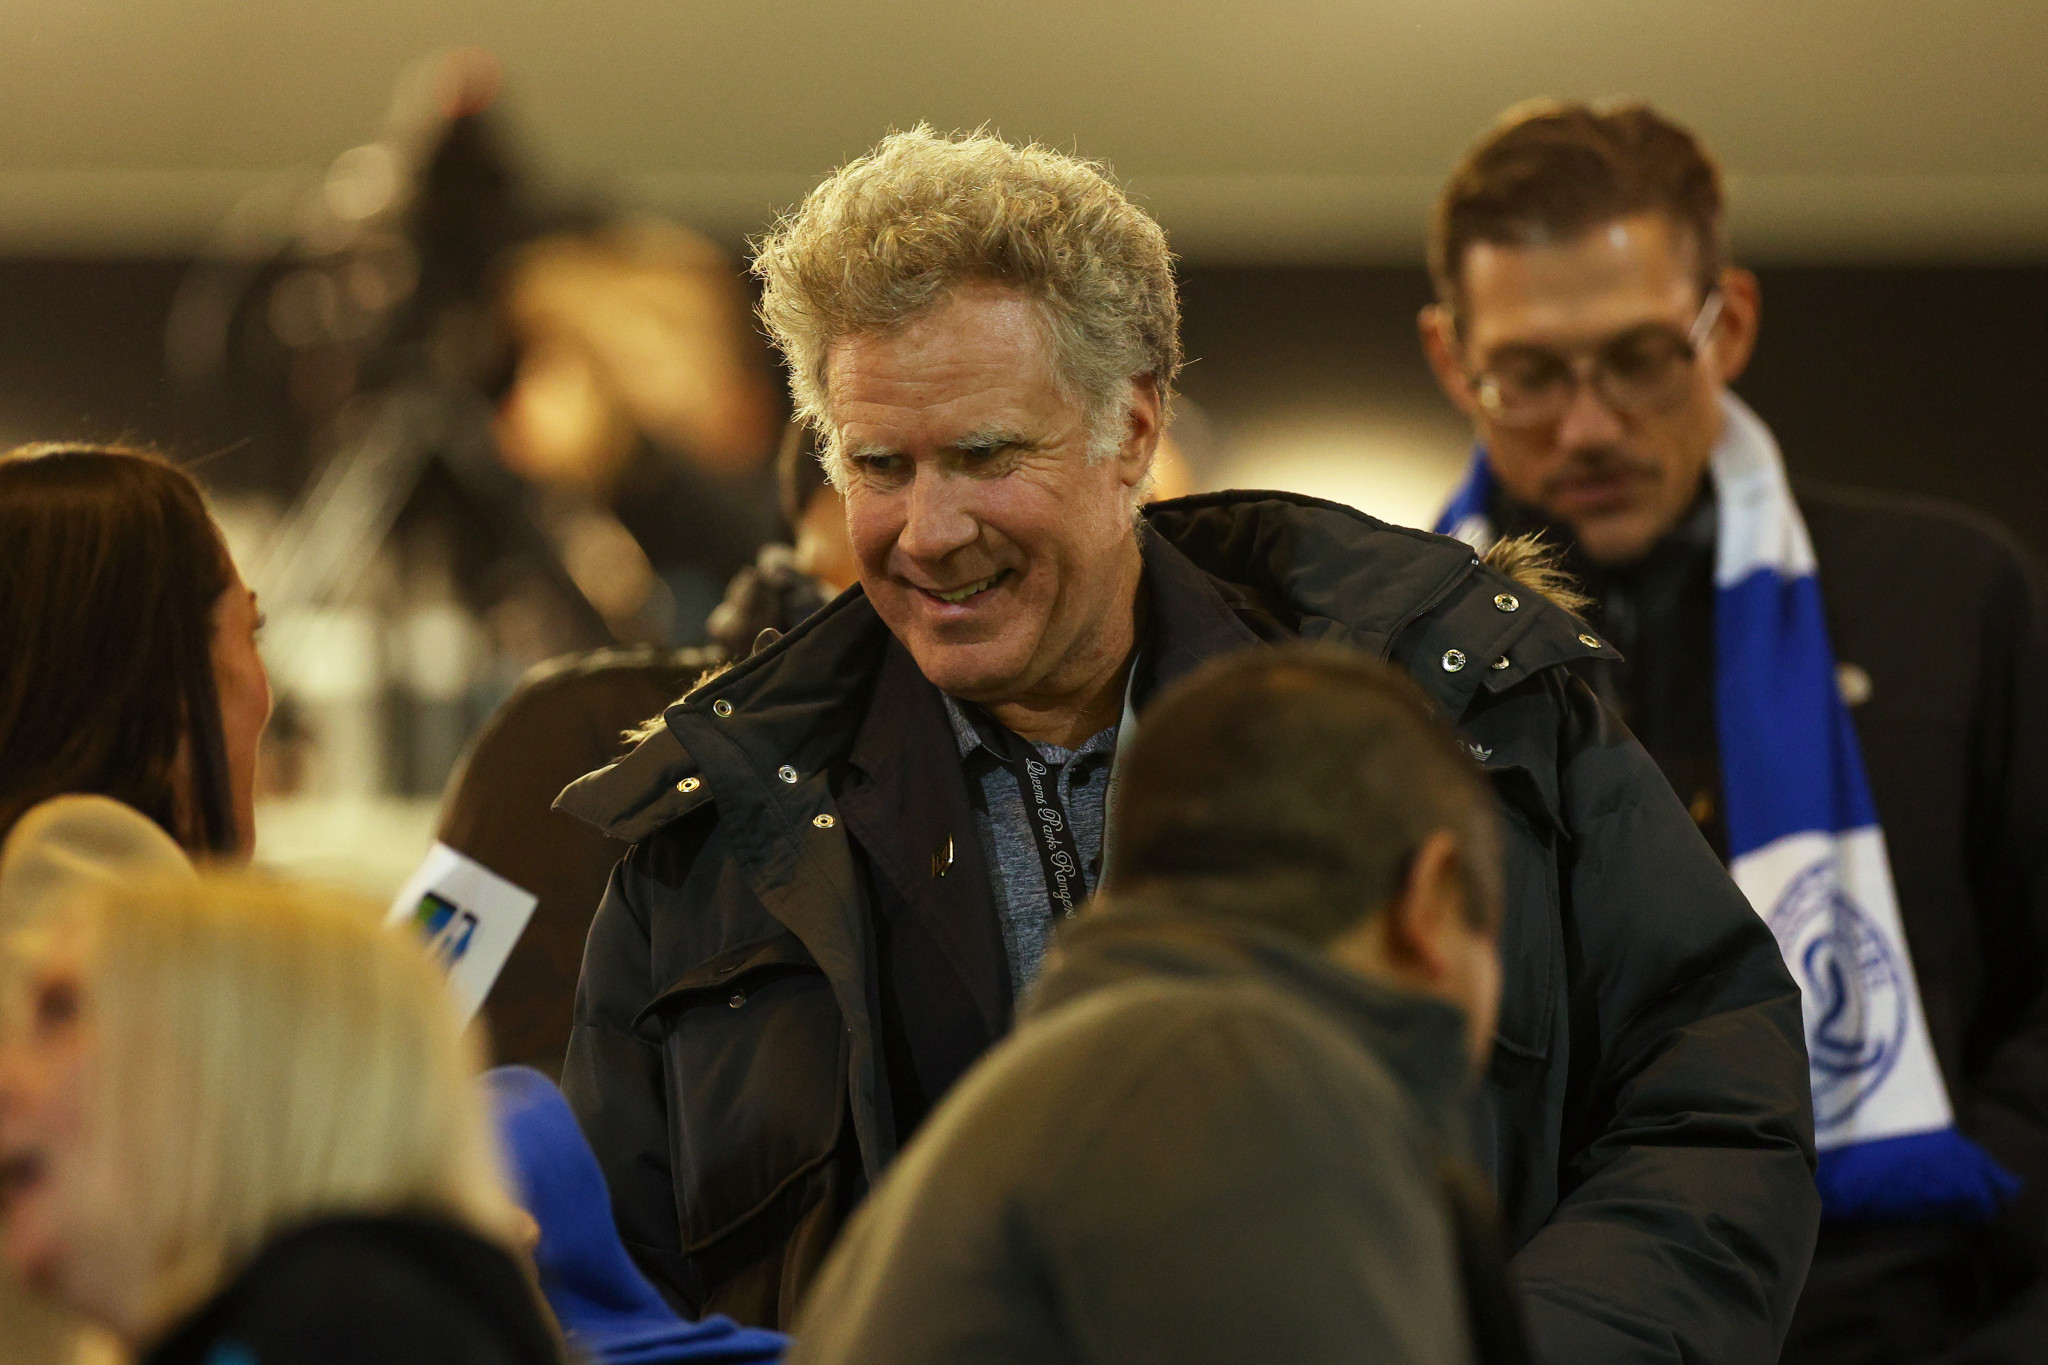 Ferrell previously attended various matches across the UK revealing his love for the English game. GETTY IMAGES